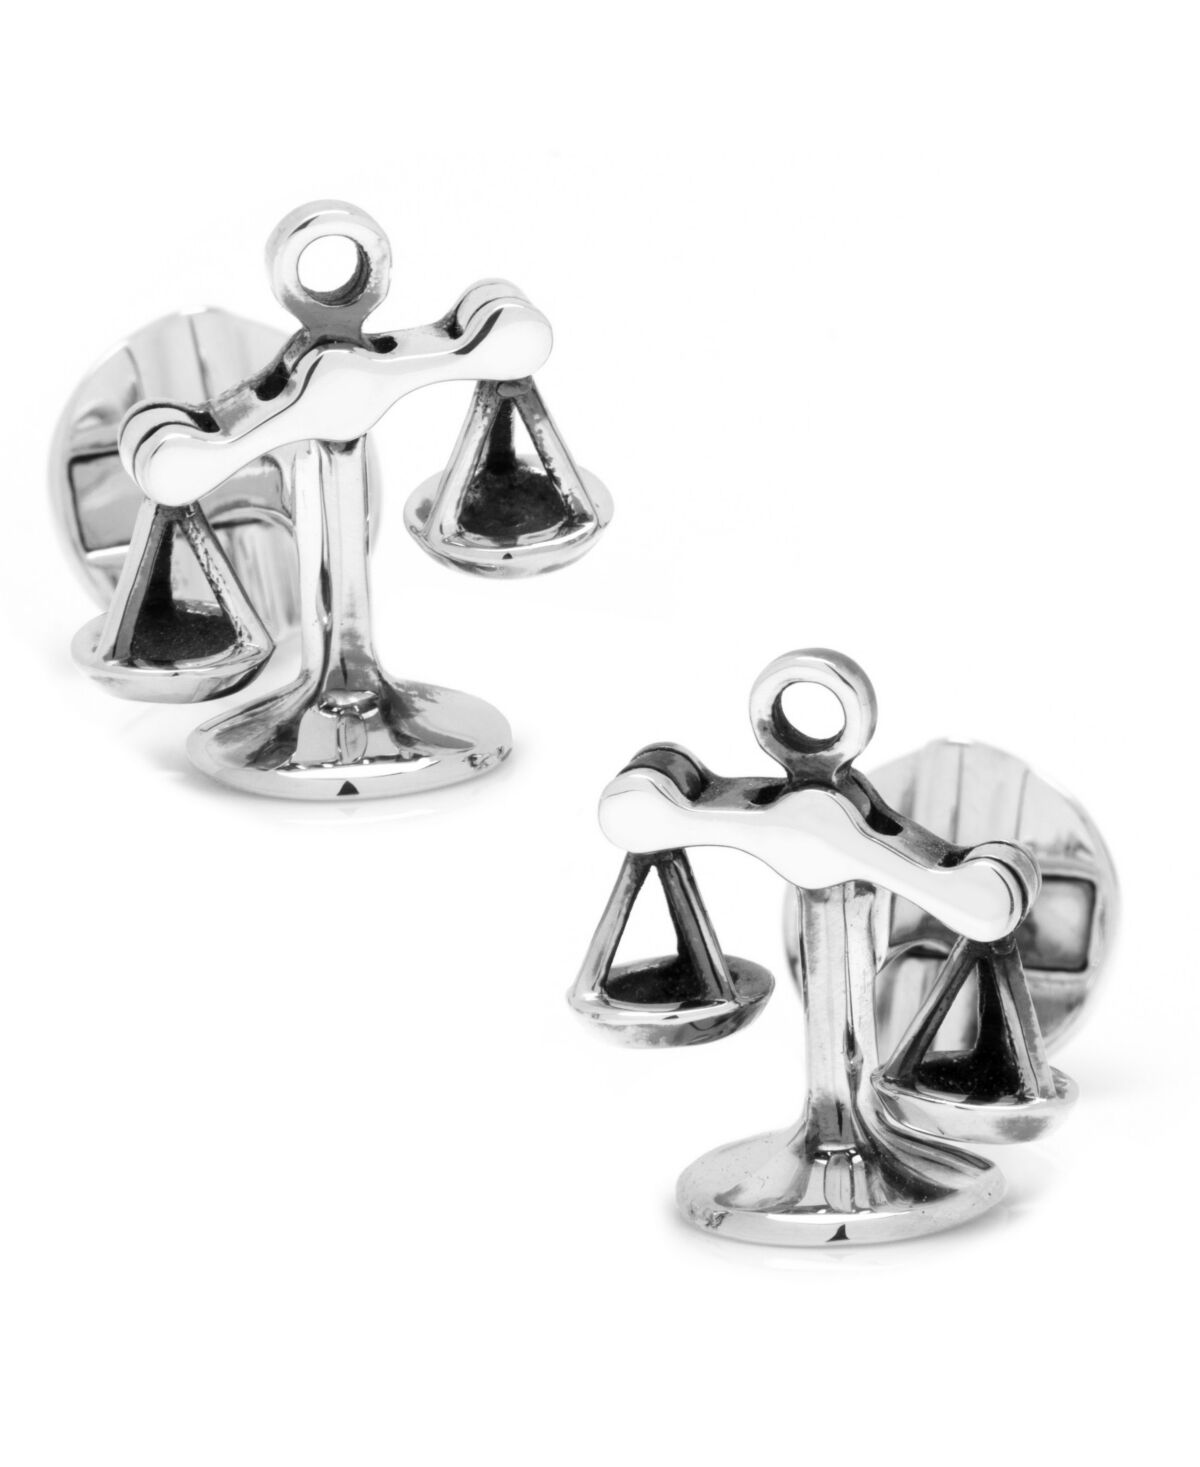 Cufflinks Inc. Moving Parts Scales of Justice Cufflinks - Silver